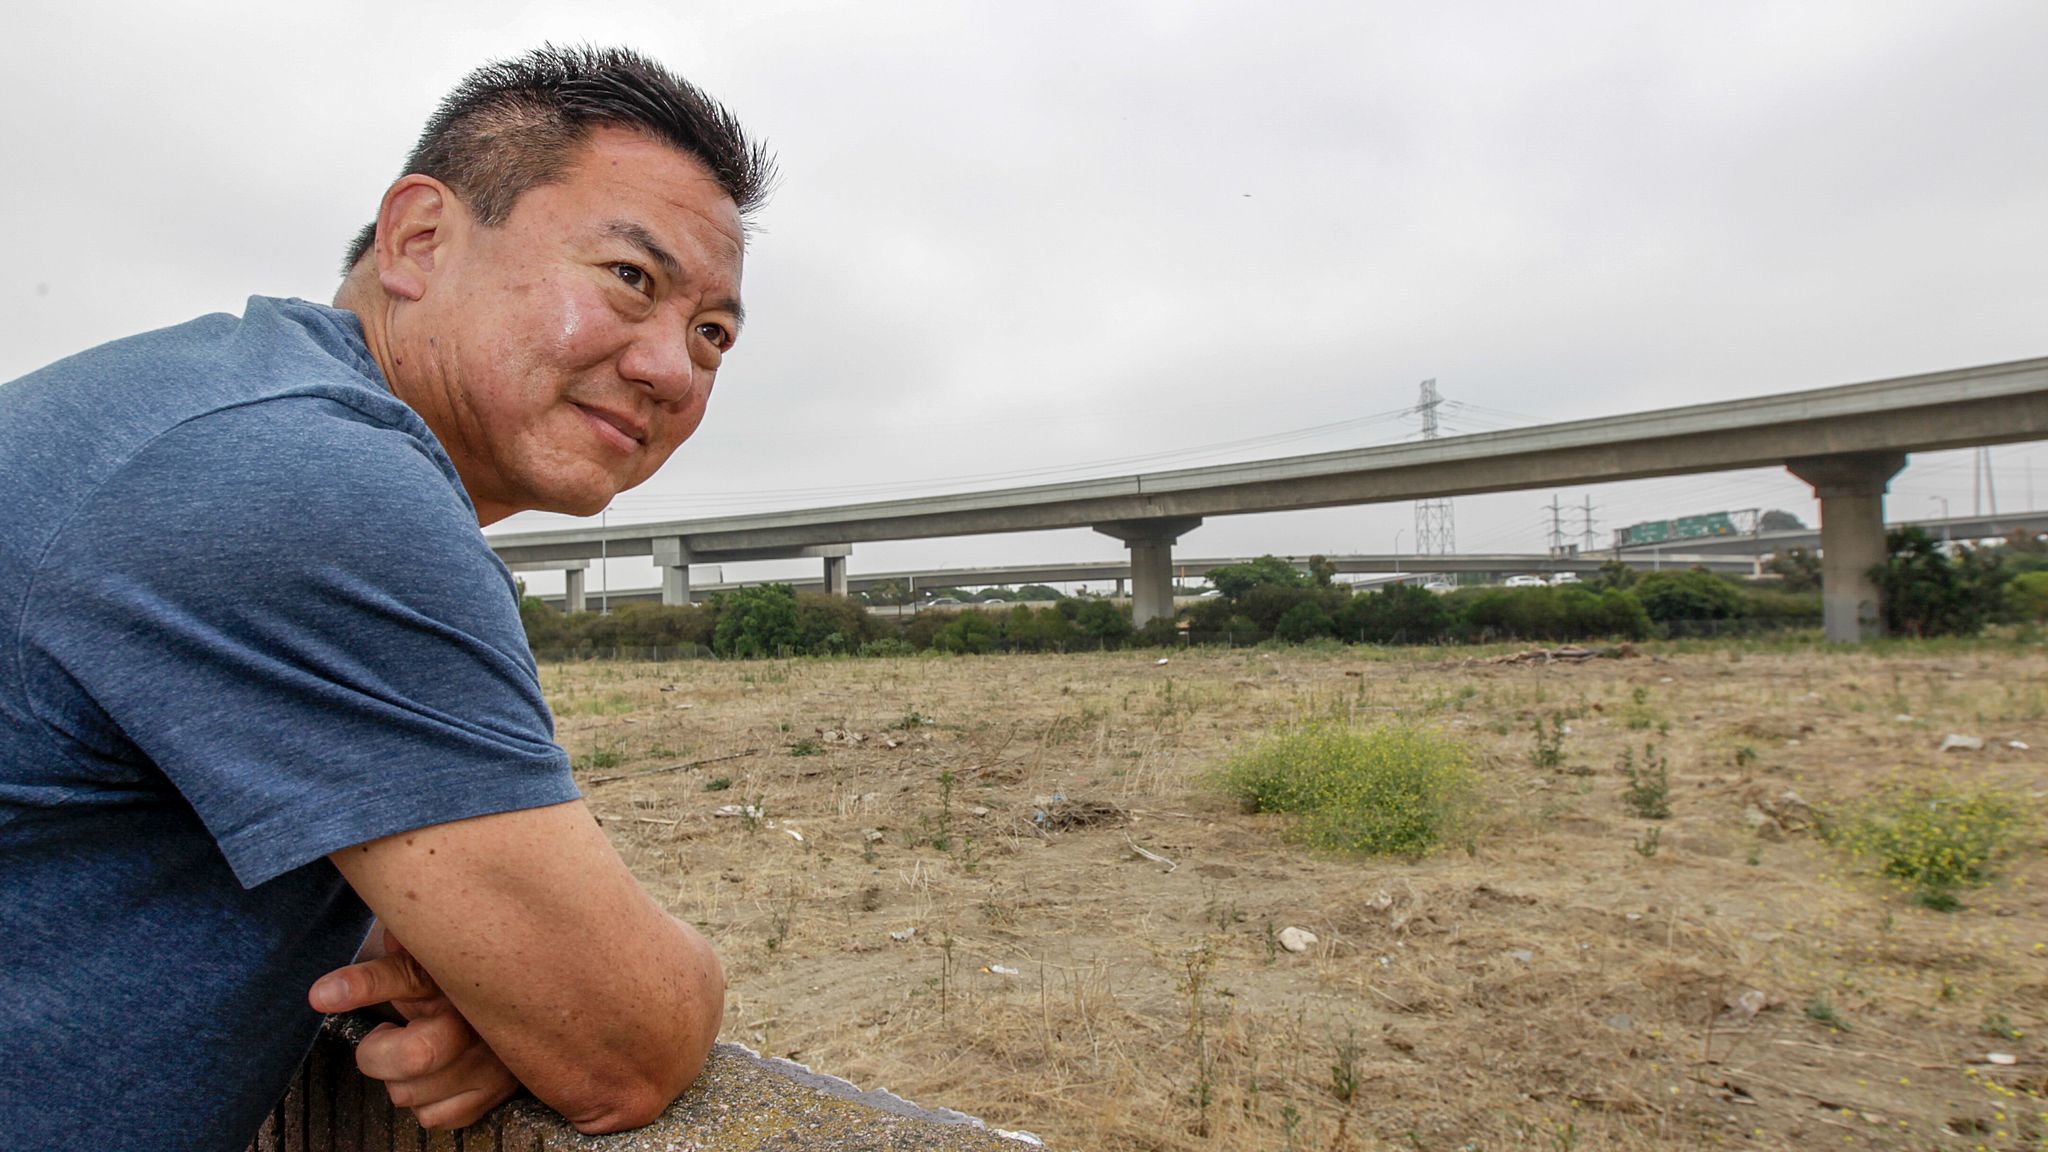 Harbor Gateway resident Craig Kusunoki looks from his backyard wall onto the site of a proposed 15-home subdivision planned near the interchange of the 110 and 91 Freeways. Opponents say future residents will face noise and air pollution from nearby cars and trucks.